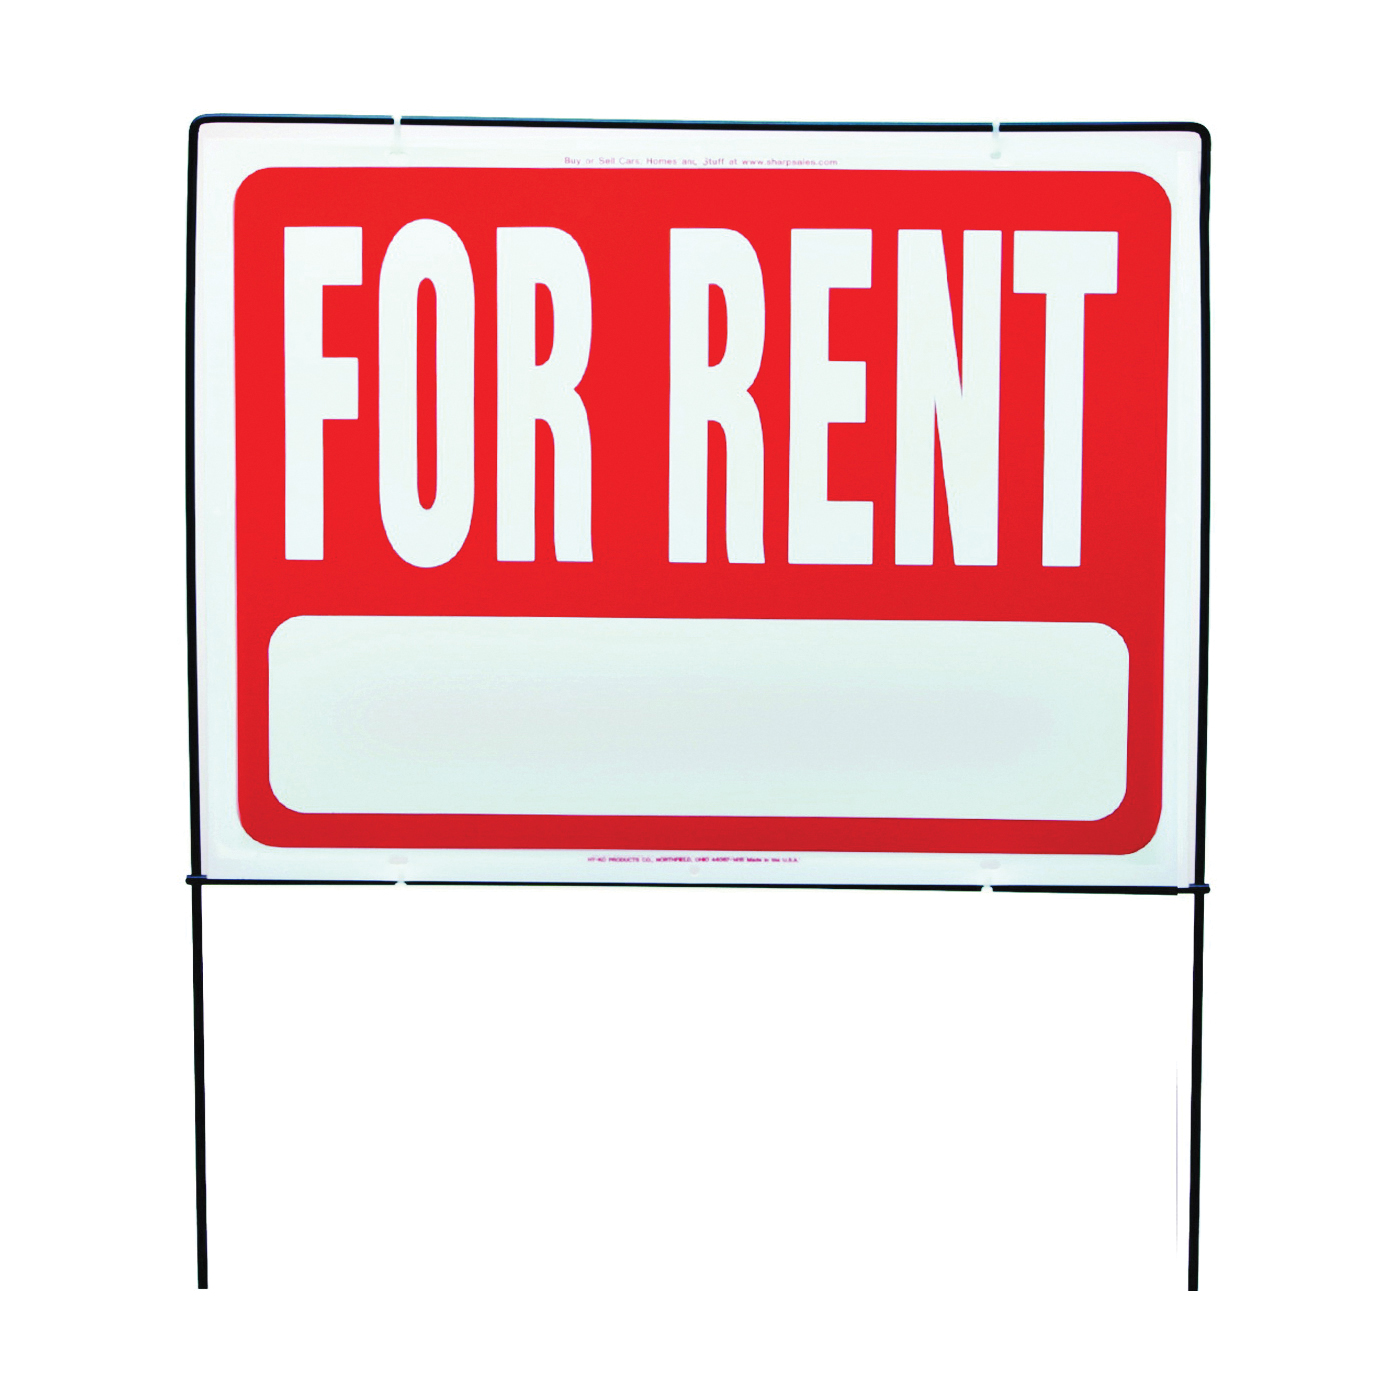 RSF-603 Real Estate Sign, Rectangular, FOR RENT, White Legend, Red Background, Plastic